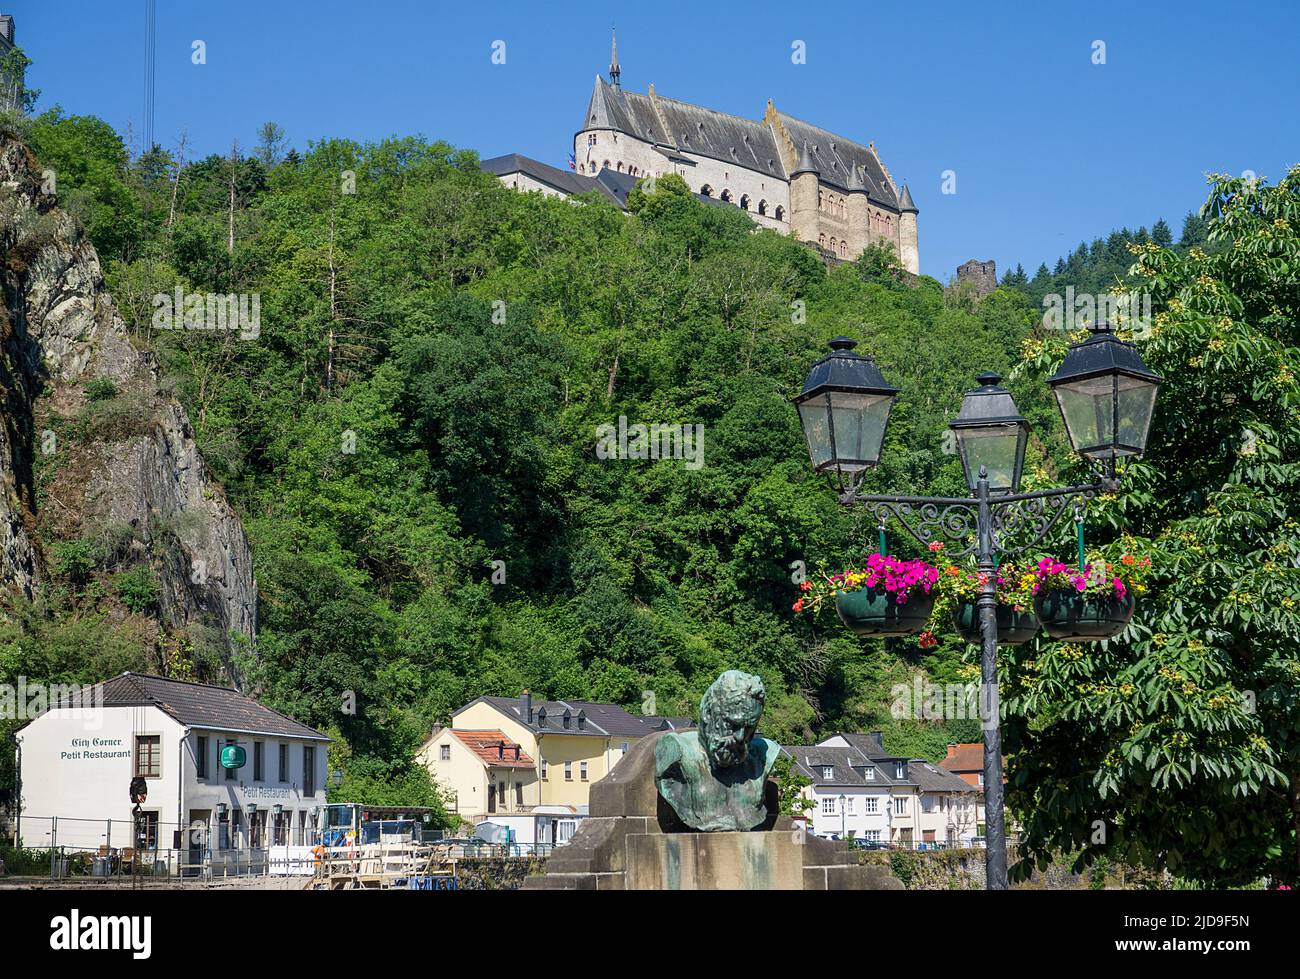 View from the Our bridge up to the castle, bust of Victor Hugo and old street lamp, village Vianden, canton of Vianden, Luxembourg, Europe Stock Photo